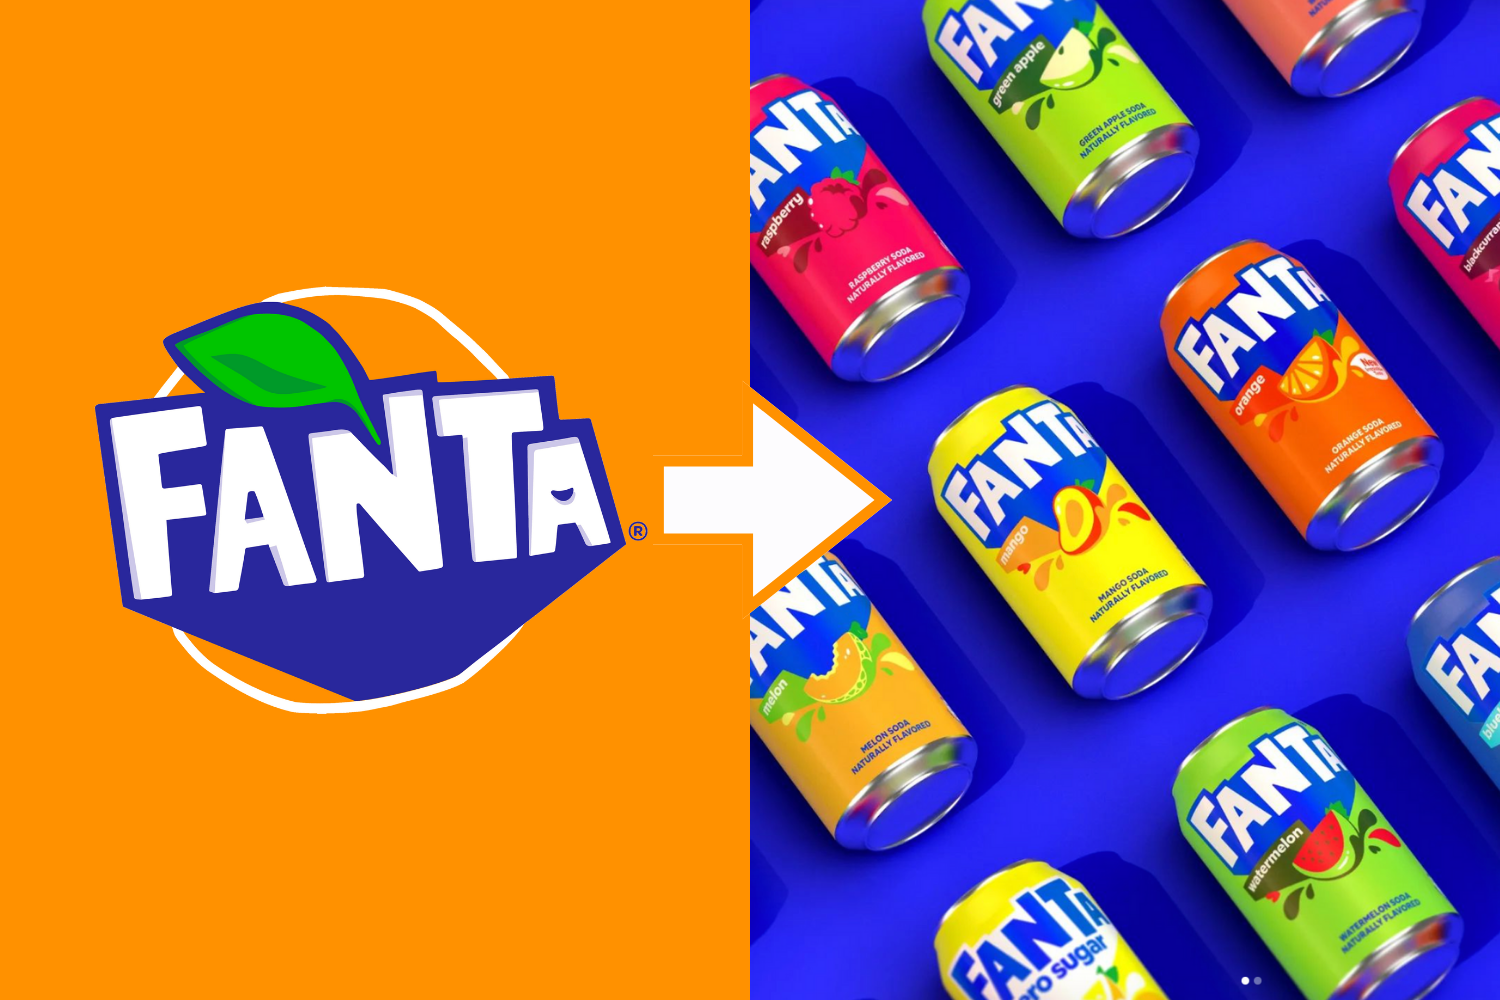 On the left, the original Fanta logo; on the right, Fanta's rebranded logo appears on soda cans